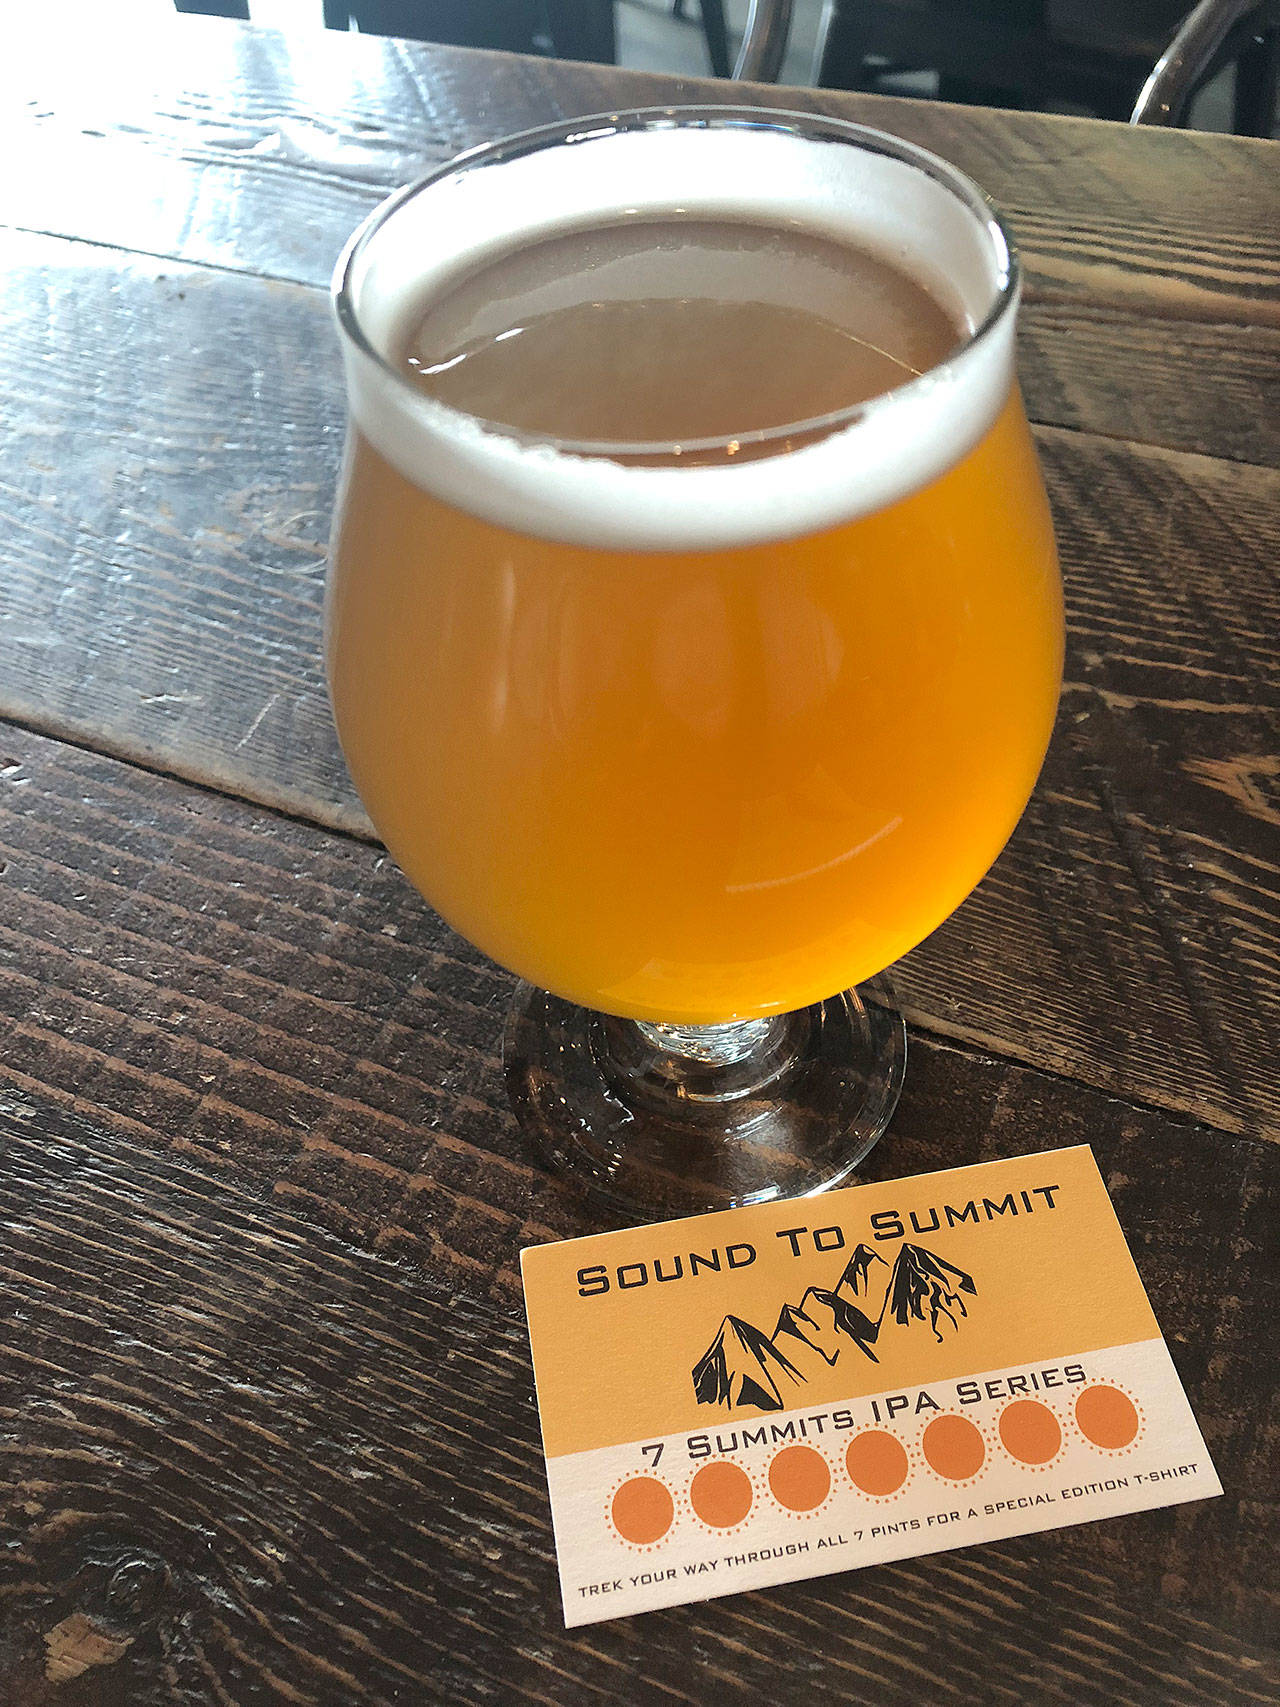 Denali double IPA is Sound to Summit’s first offering in its 7 Summits IPA Series. Punch your card with all seven over the next three months and receive a T-shirt. (Aaron Swaney)